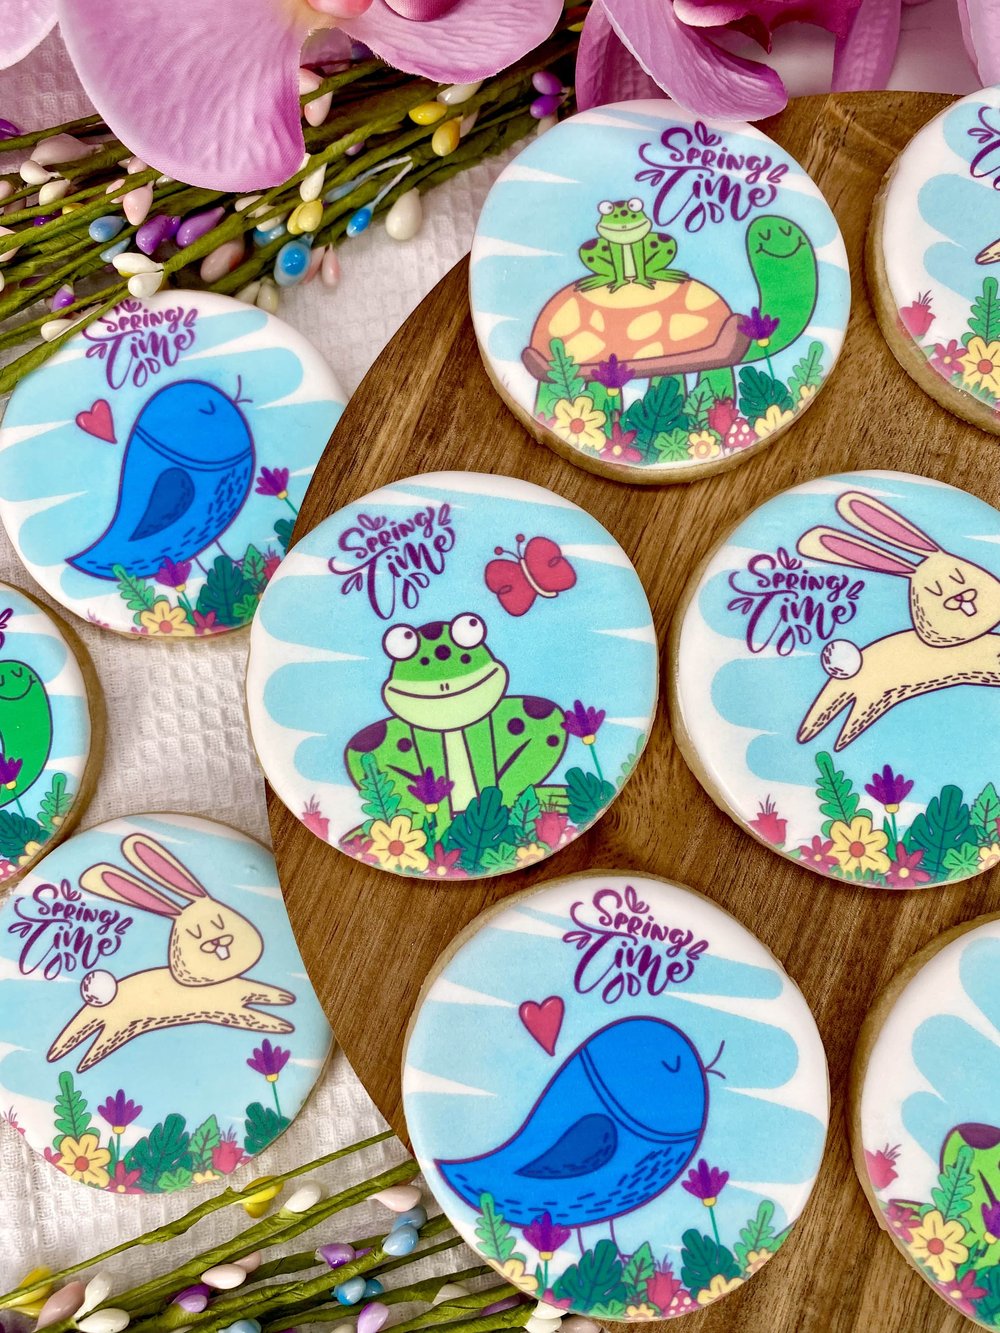 Vanilla Sugar Cookies with Spring Time Images featuring a colorful Turtle, Frog and Blue Bird with a Spring Time message.